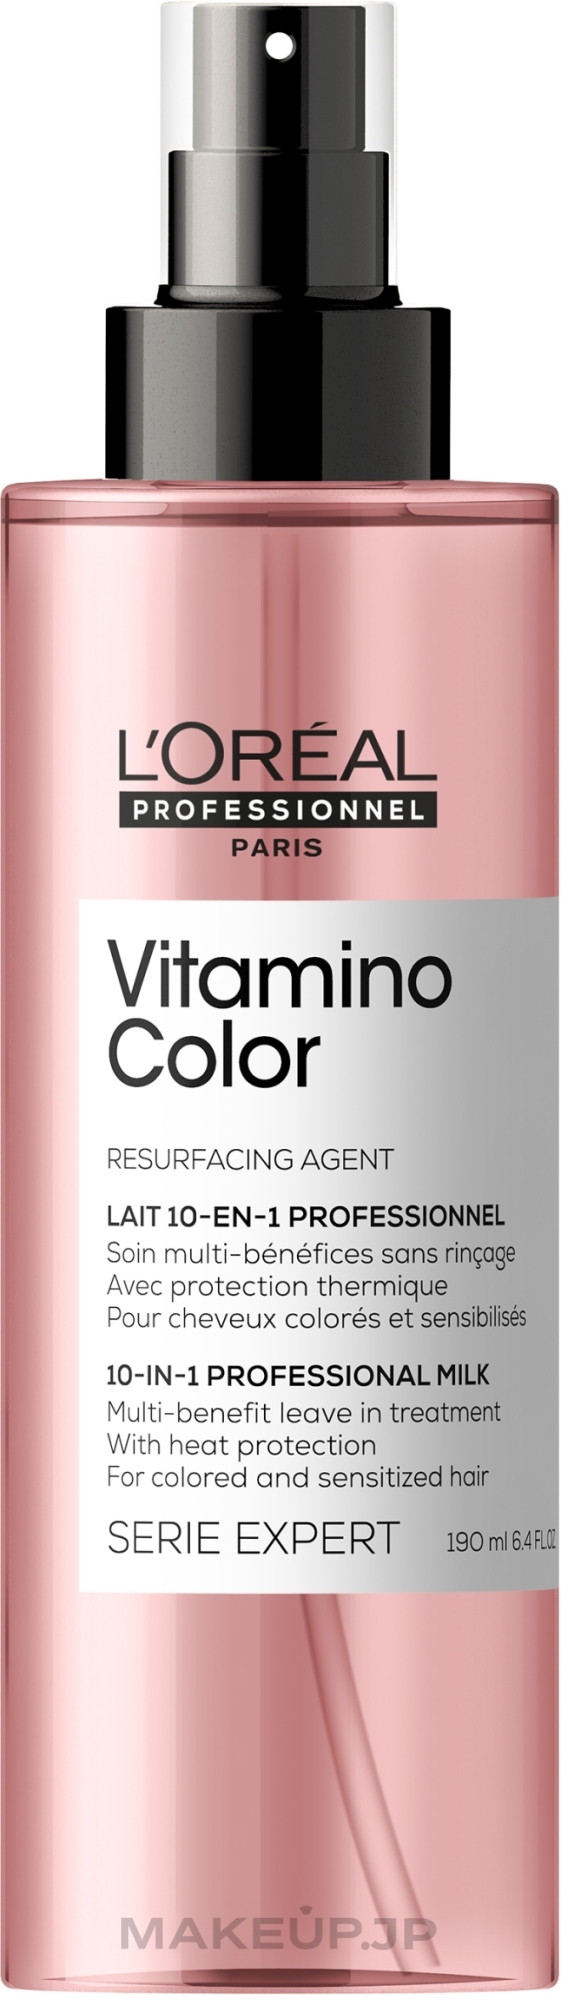 Multifunctional Spray for Colored Hair - L'Oreal Professionnel Vitamino Color A-OX 10 in 1 — photo 190 ml NEW